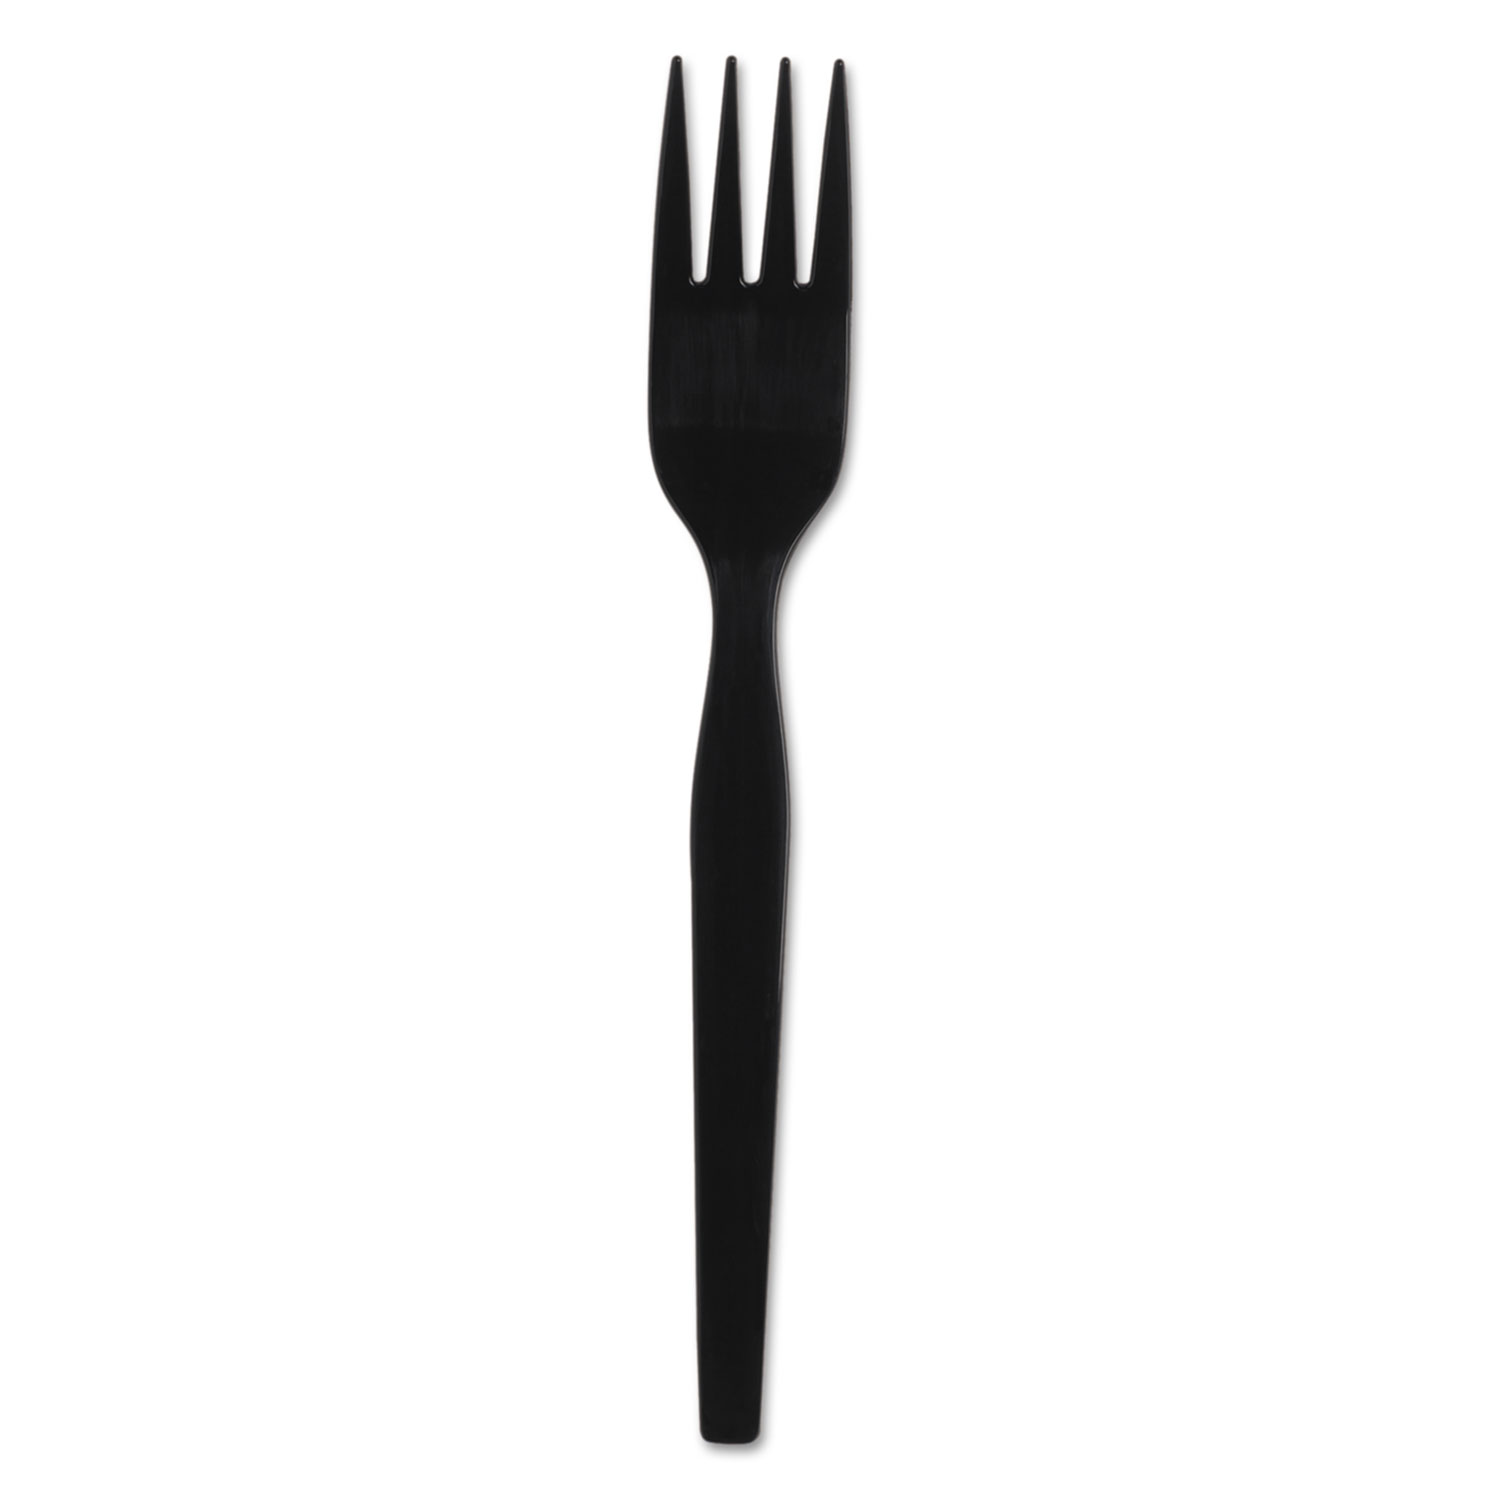  Dixie SSPFH51 SmartStock Plastic Cutlery Refill, Forks, 6, Black, 40/Pack, 24 Packs/Carton (DXESSPFH51) 